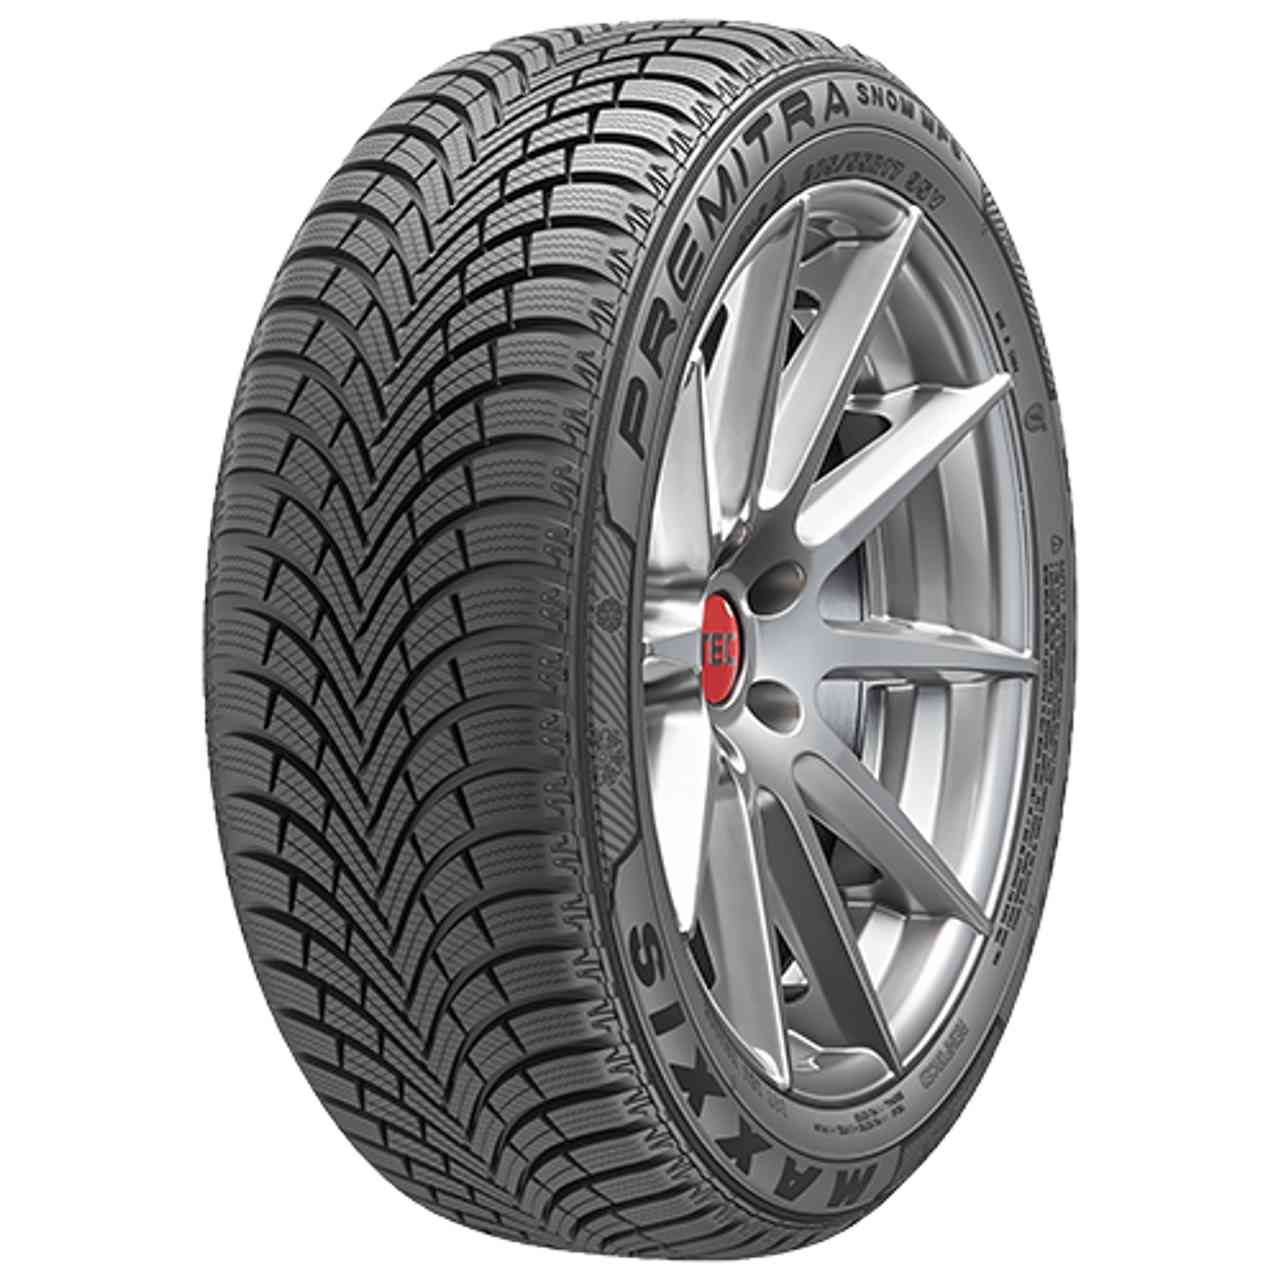 MAXXIS PREMITRA SNOW WP6 215/60R16 99H BSW XL